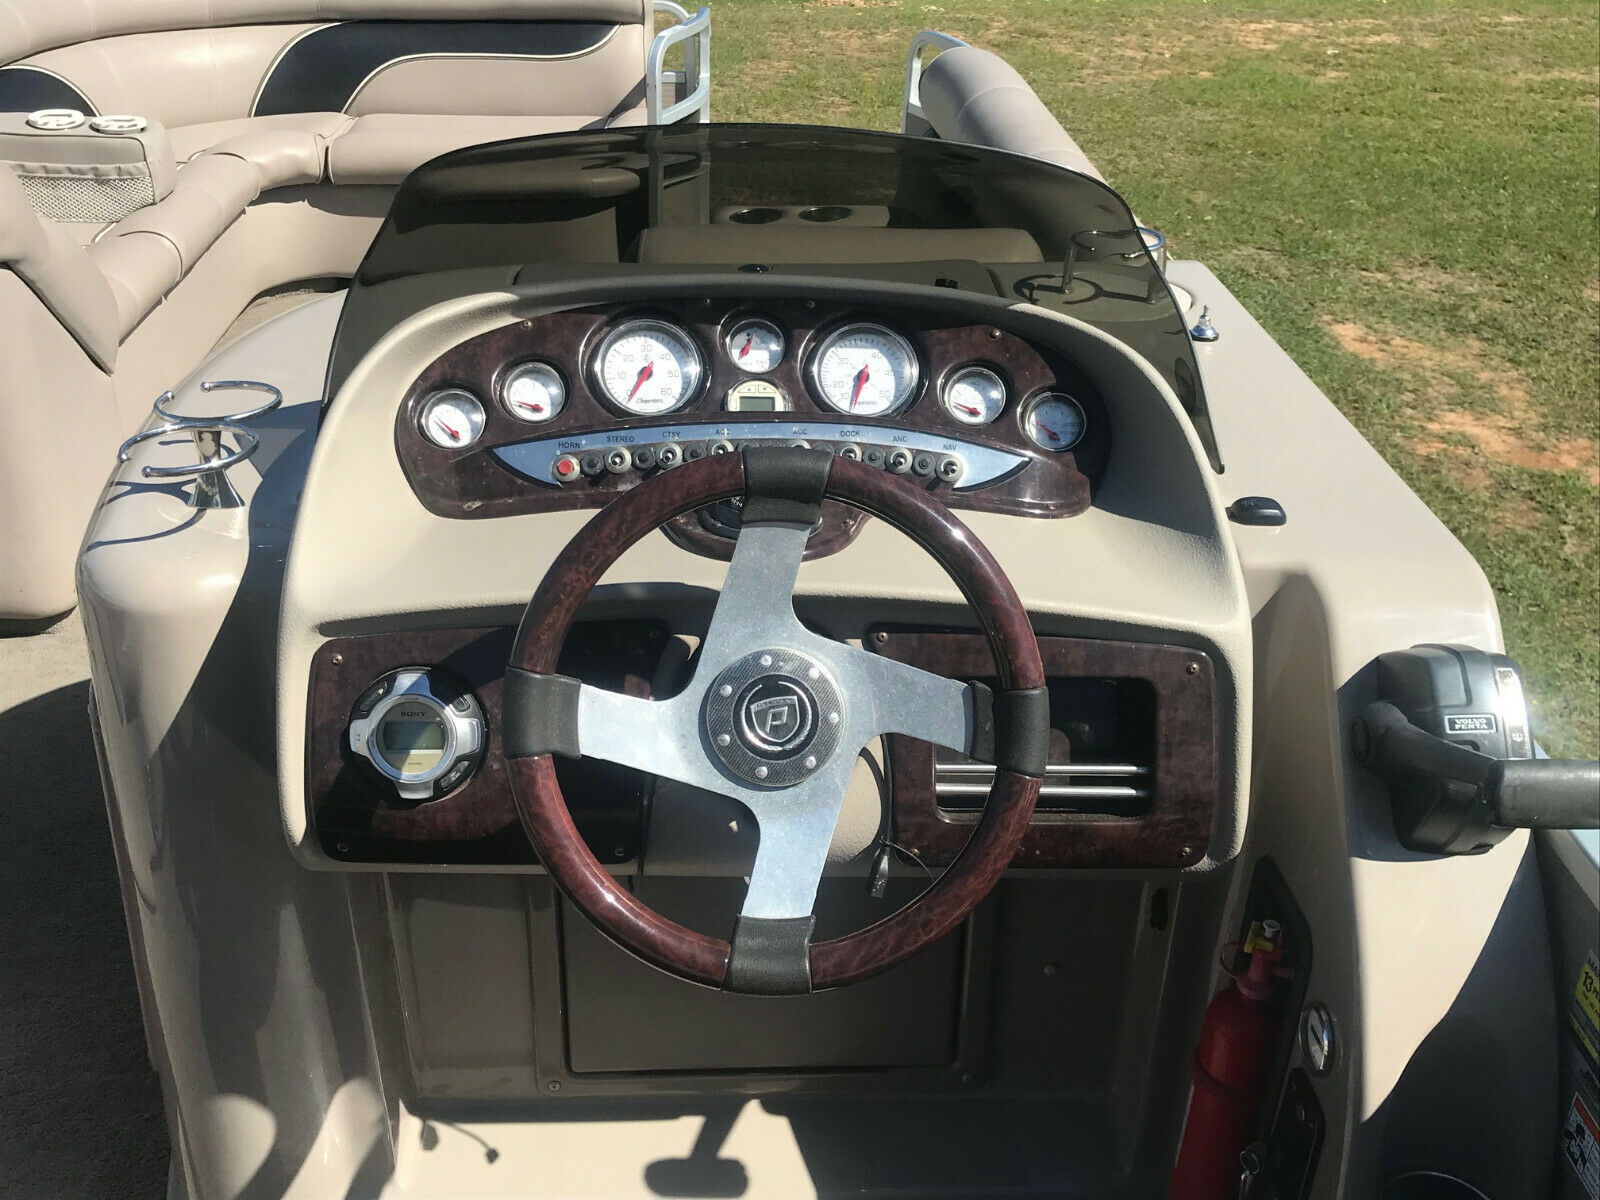 Premier Pontoons 2008 for sale for $305 - Boats-from-USA.com